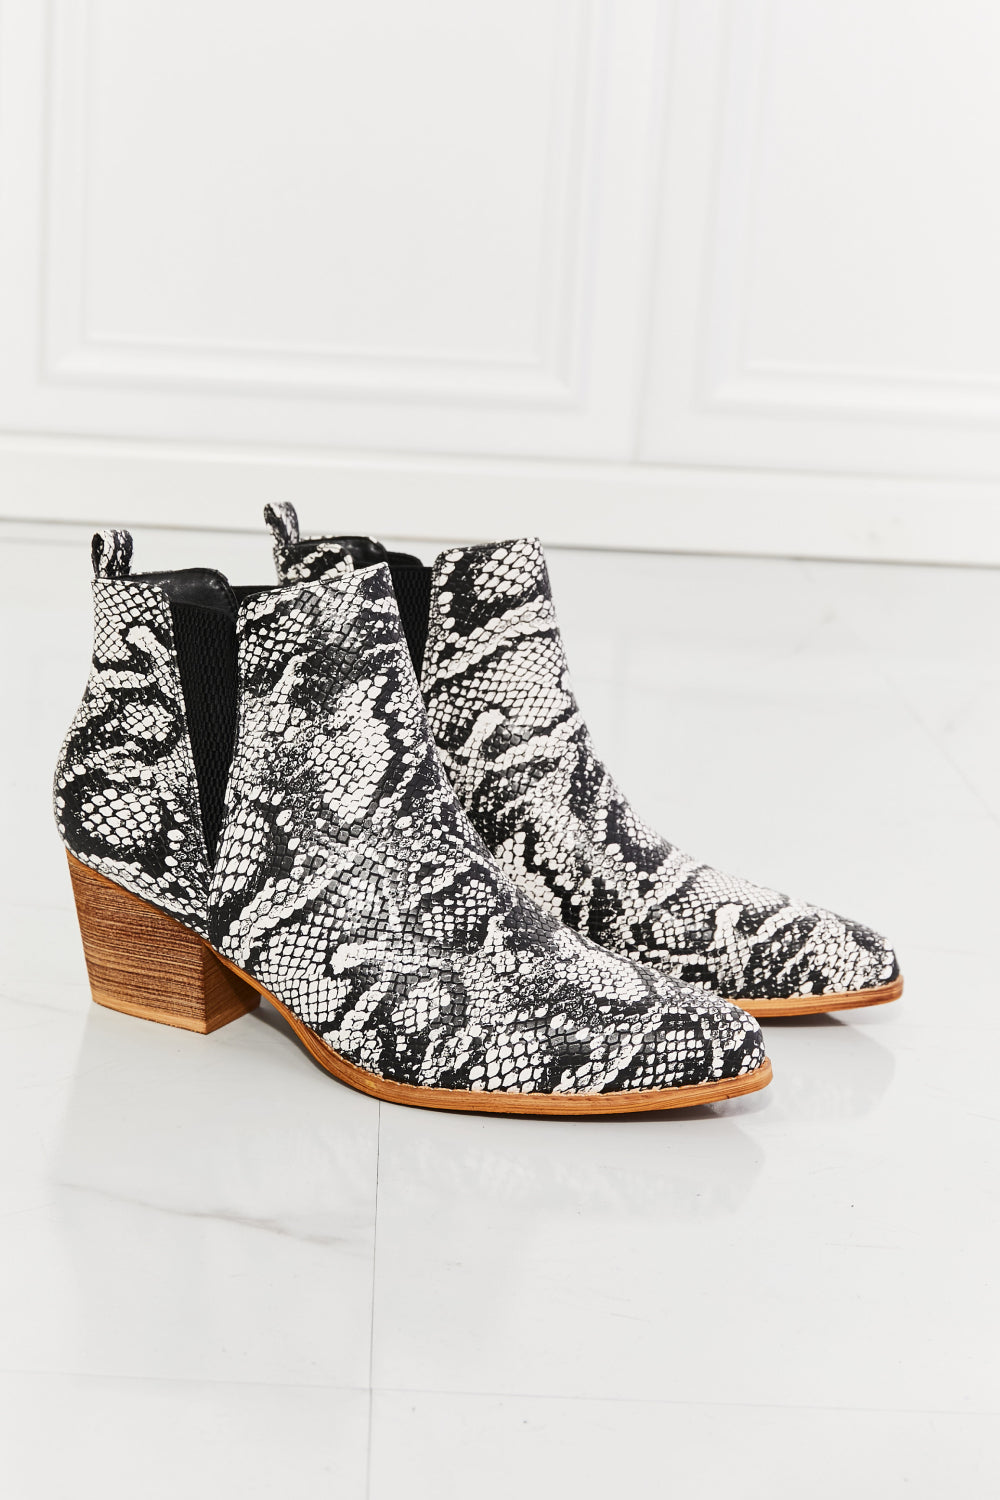 SHOW STOPPER SNAKESKIN POINT TOE BOOTIES